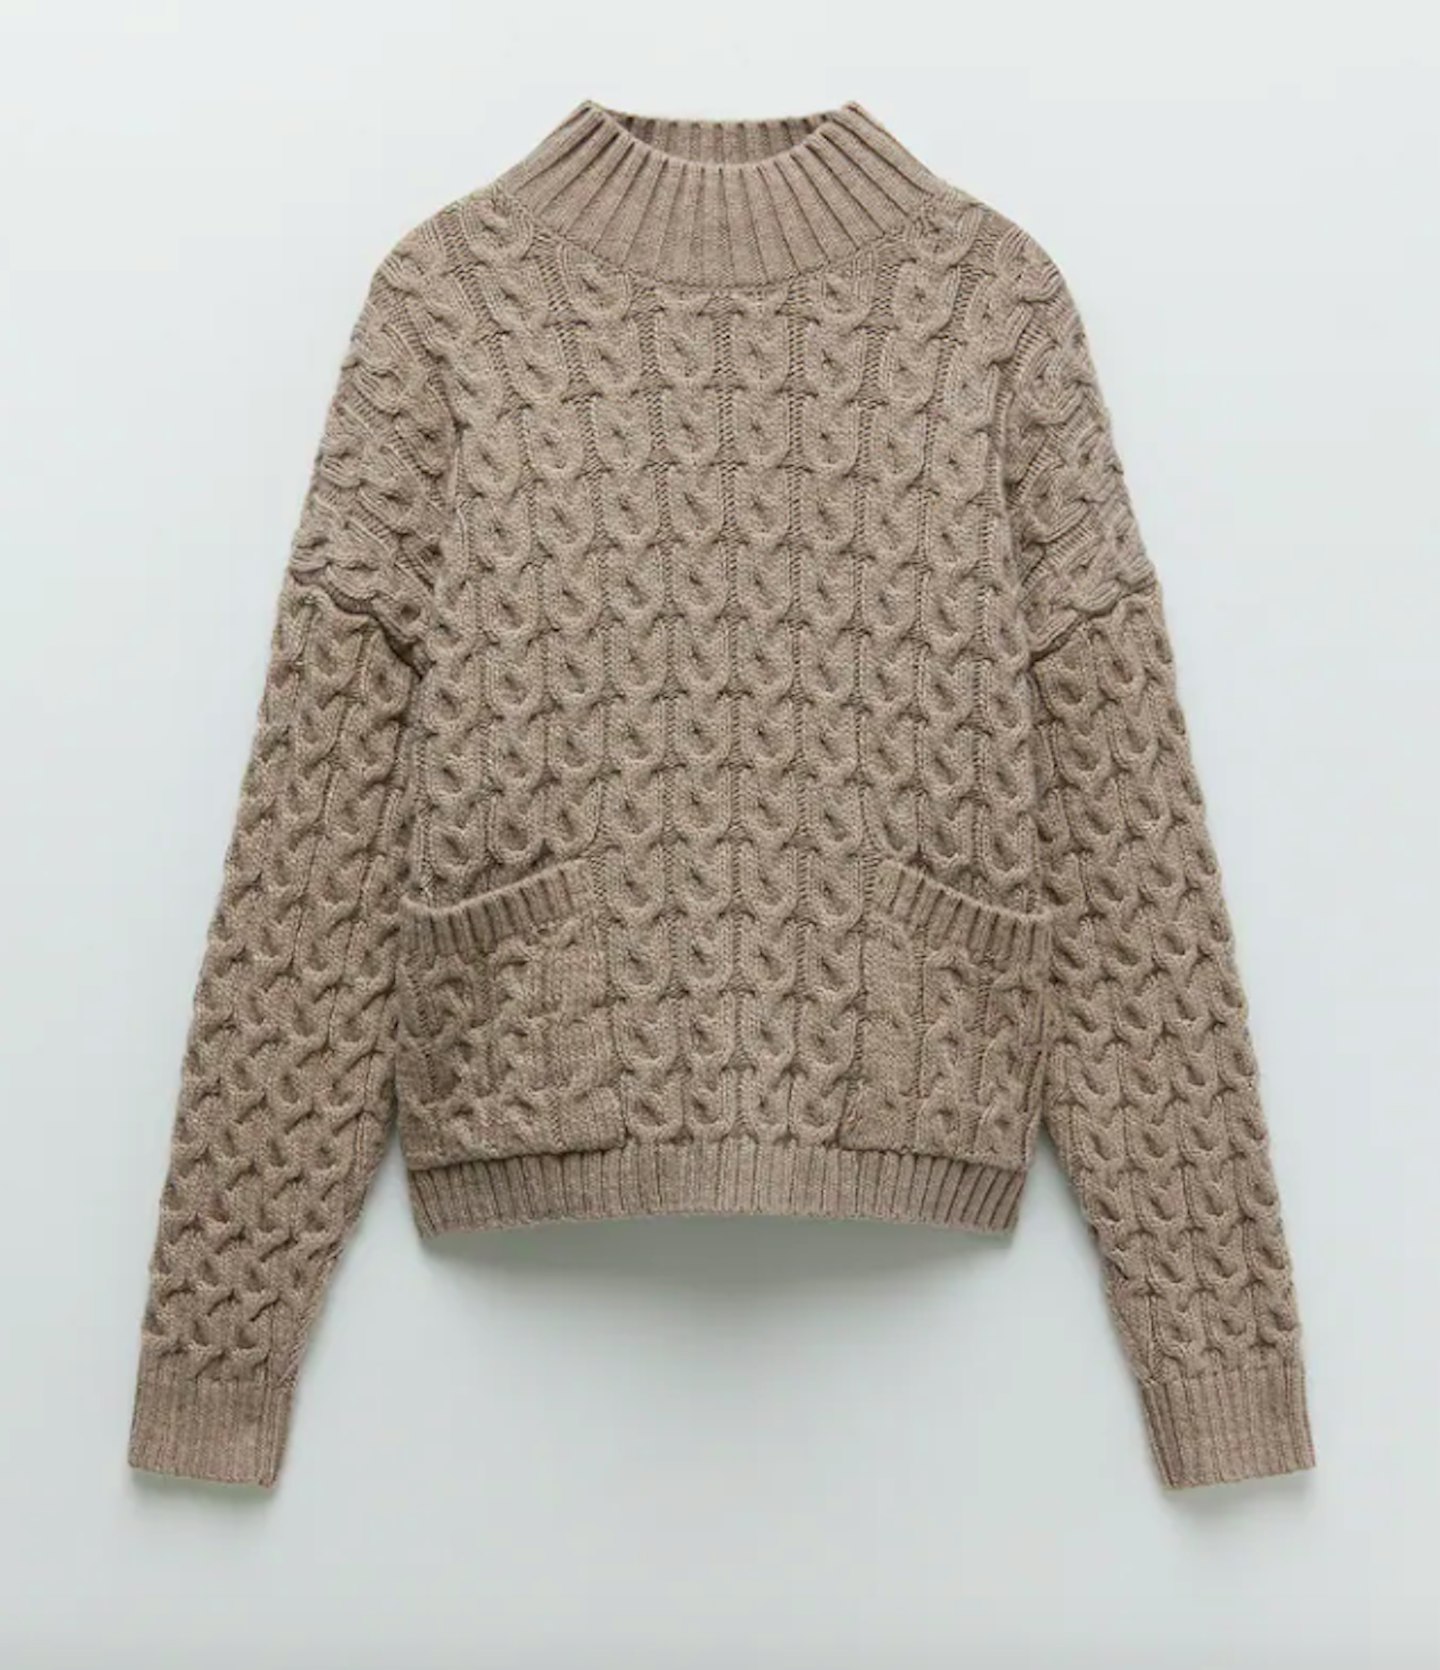 Zara, Cable-Knit Sweater, £29.99